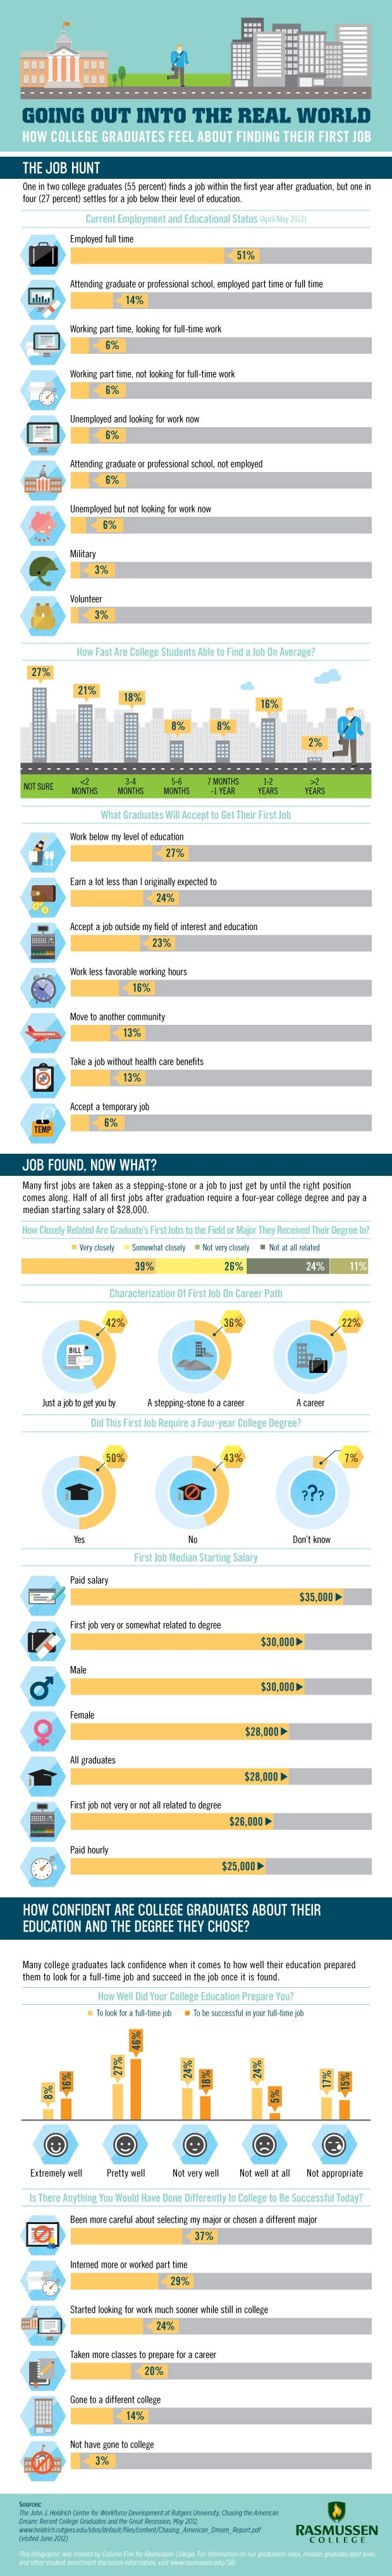 How College Graduates Feel About Finding Their First Job